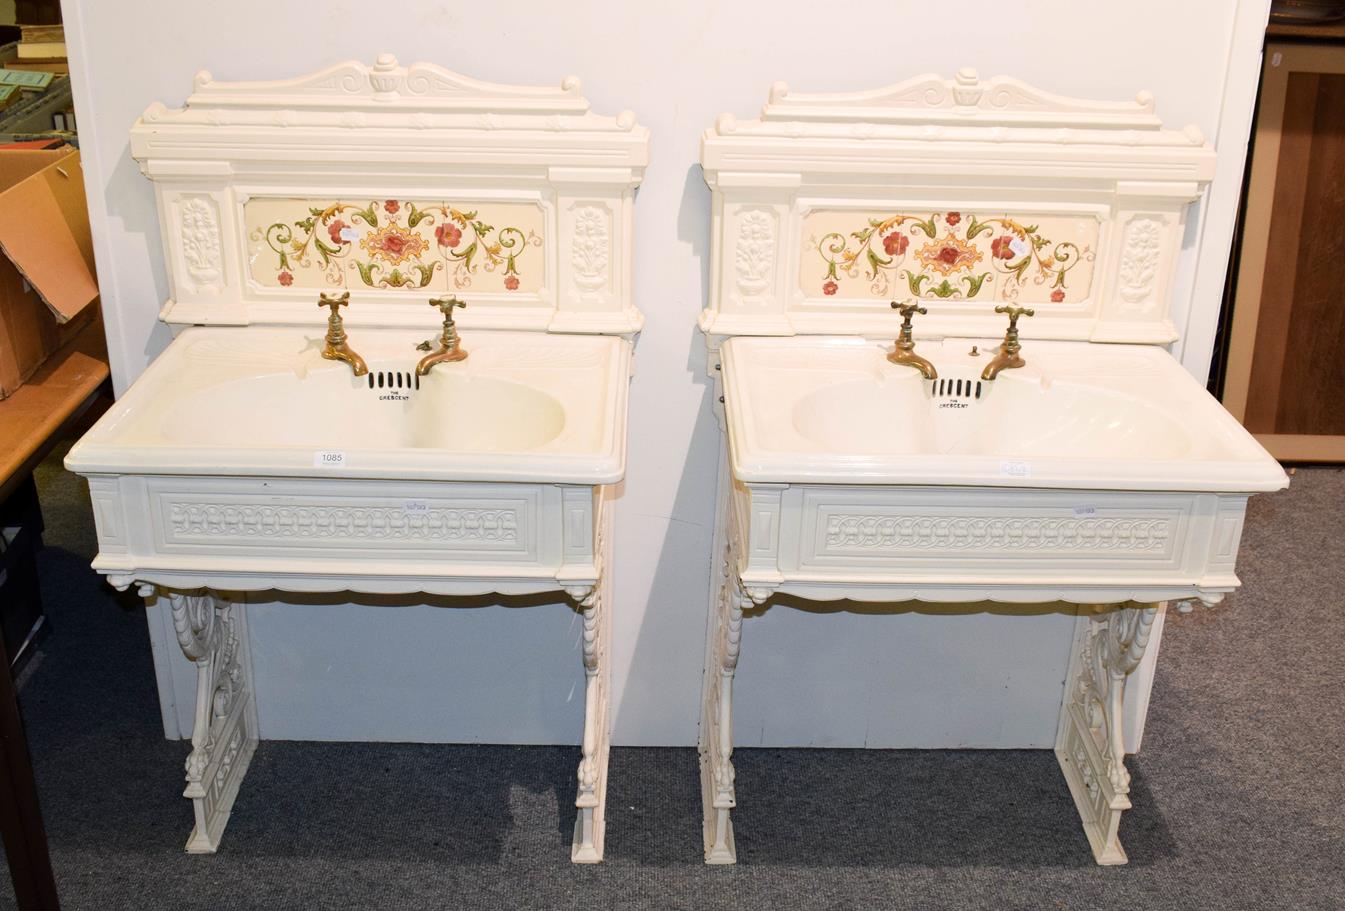 A pair of Victorian ladies and gents wash basins on painted cast iron stands with tiles splash-backs